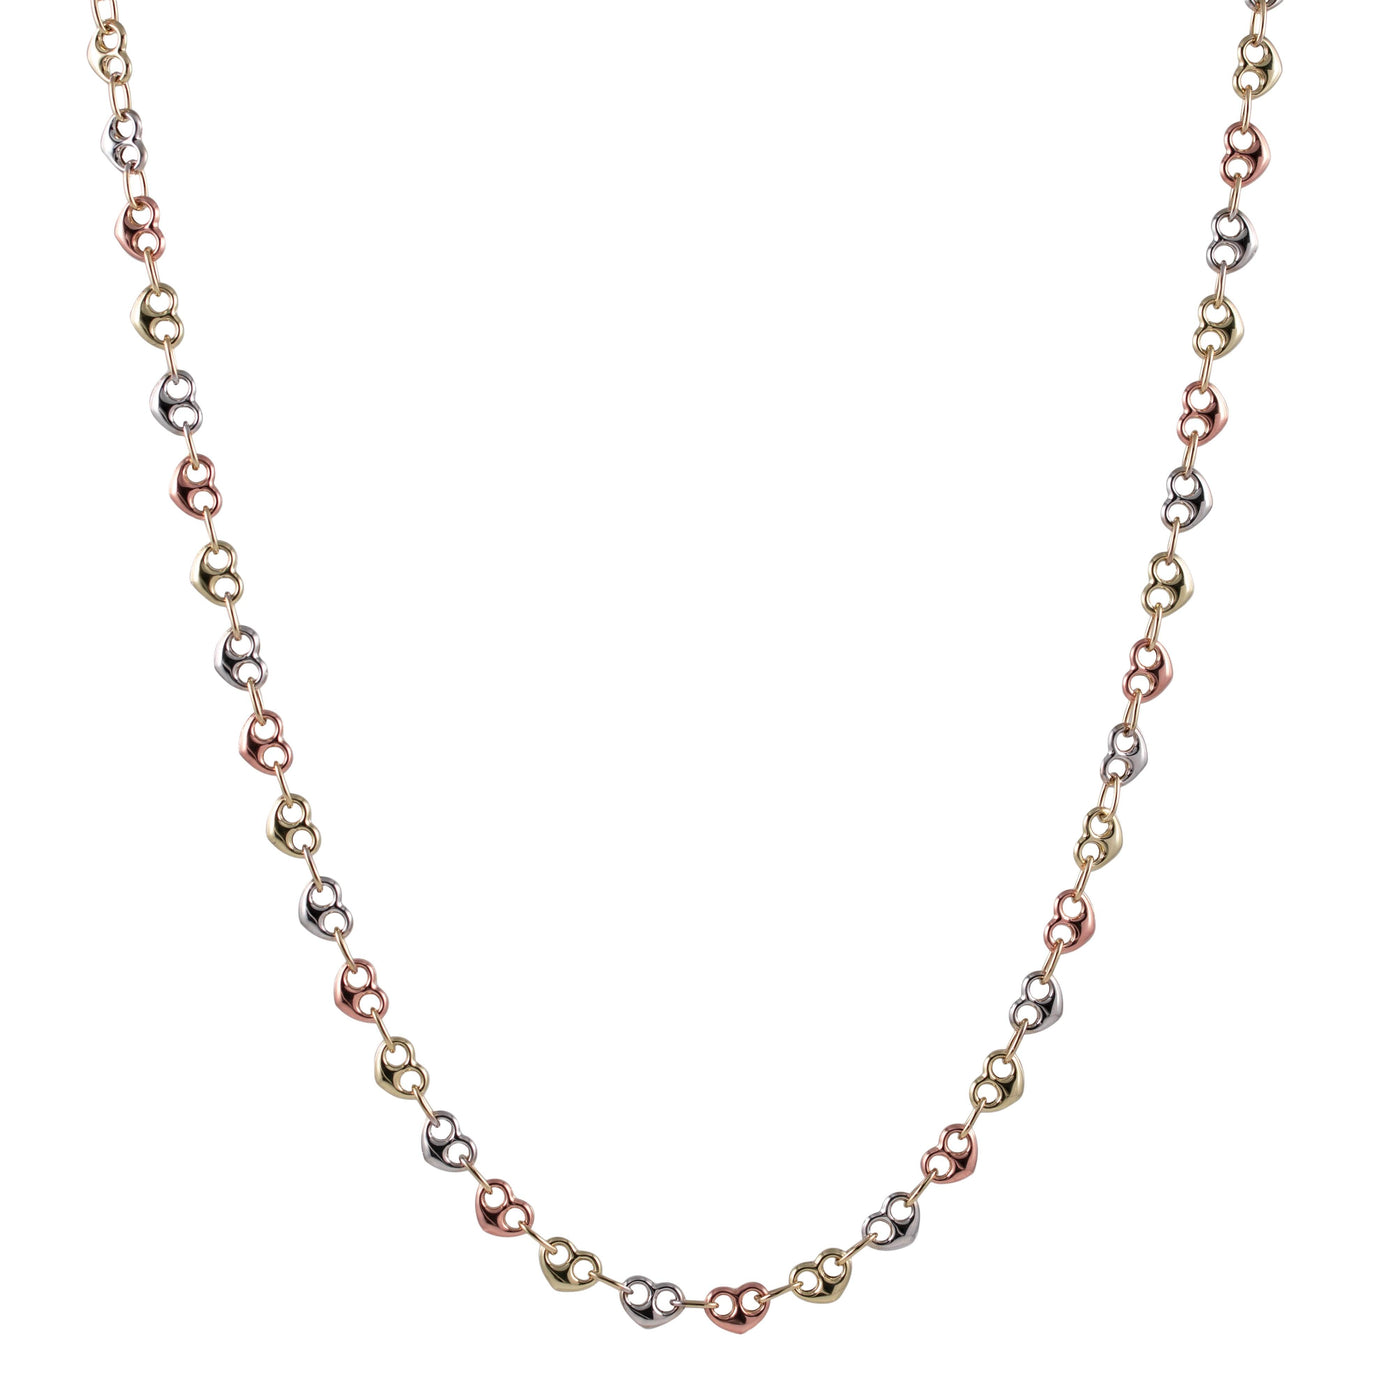 6mm Puffed Heart Shape Link Necklace 10K Tri-Color Gold - bayamjewelry